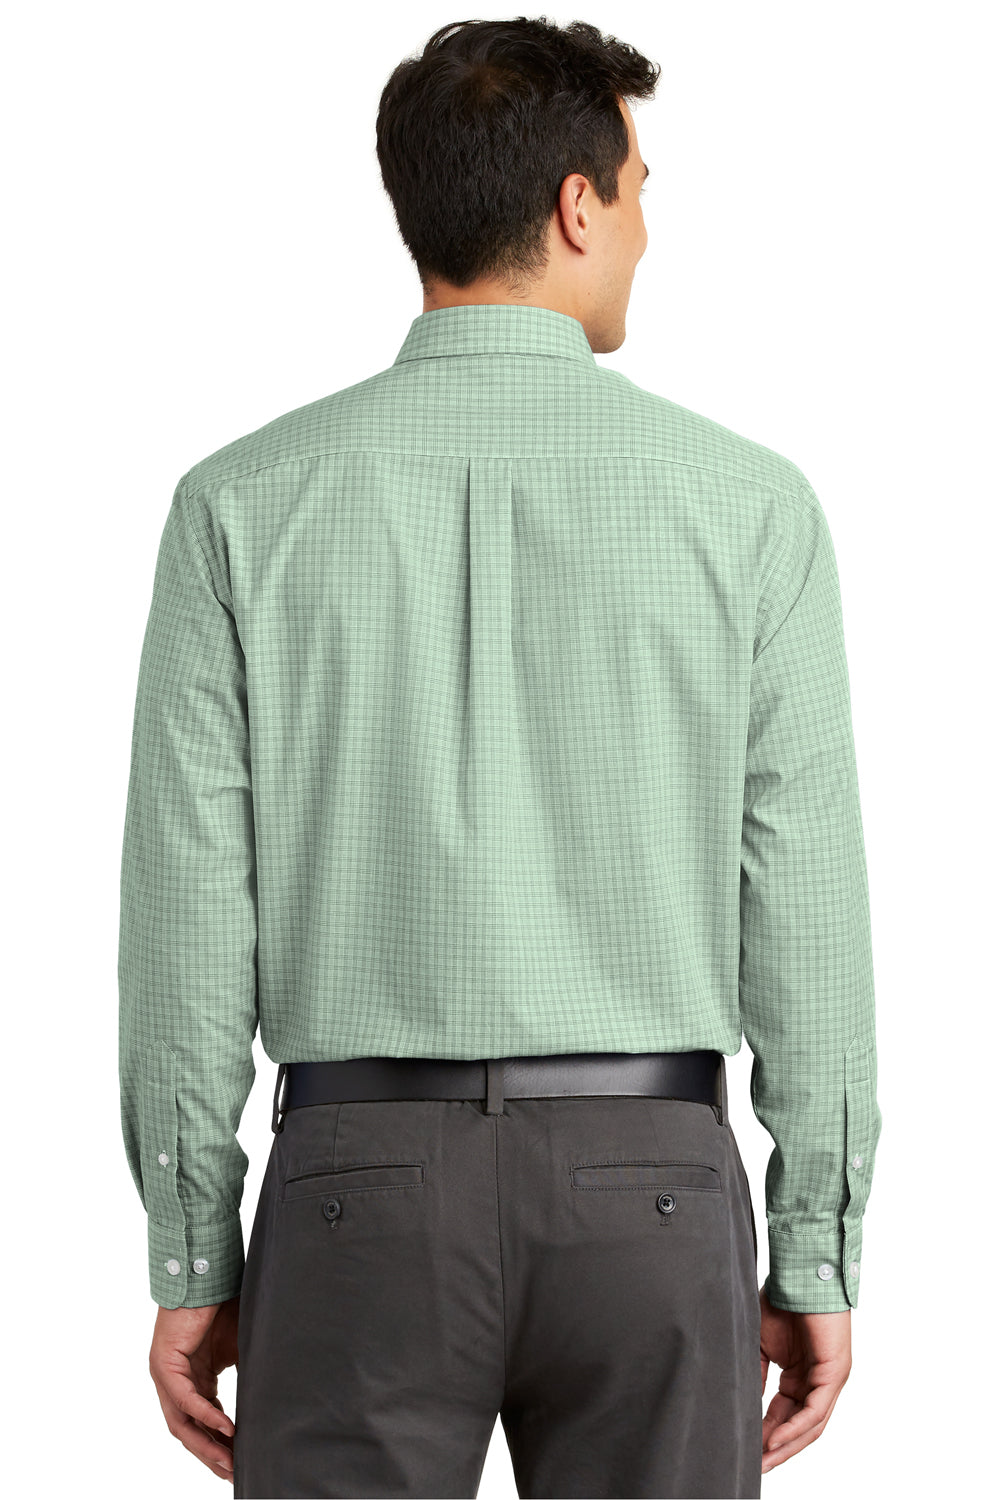 Port Authority S639 Mens Easy Care Wrinkle Resistant Long Sleeve Button Down Shirt w/ Pocket Green Back